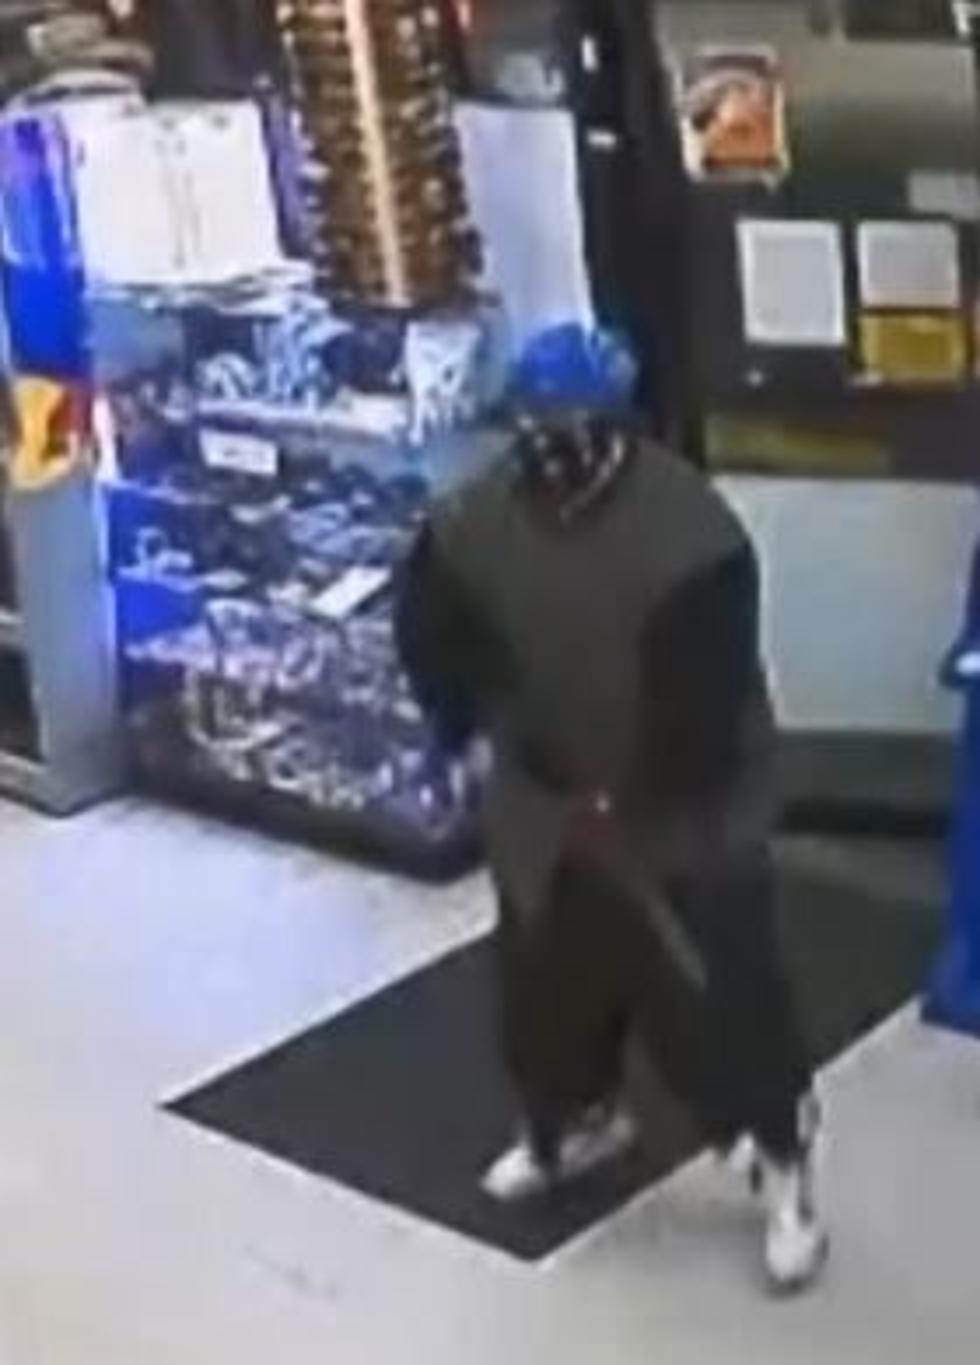 Can You Help Victoria Police Solve 2 Robberies?